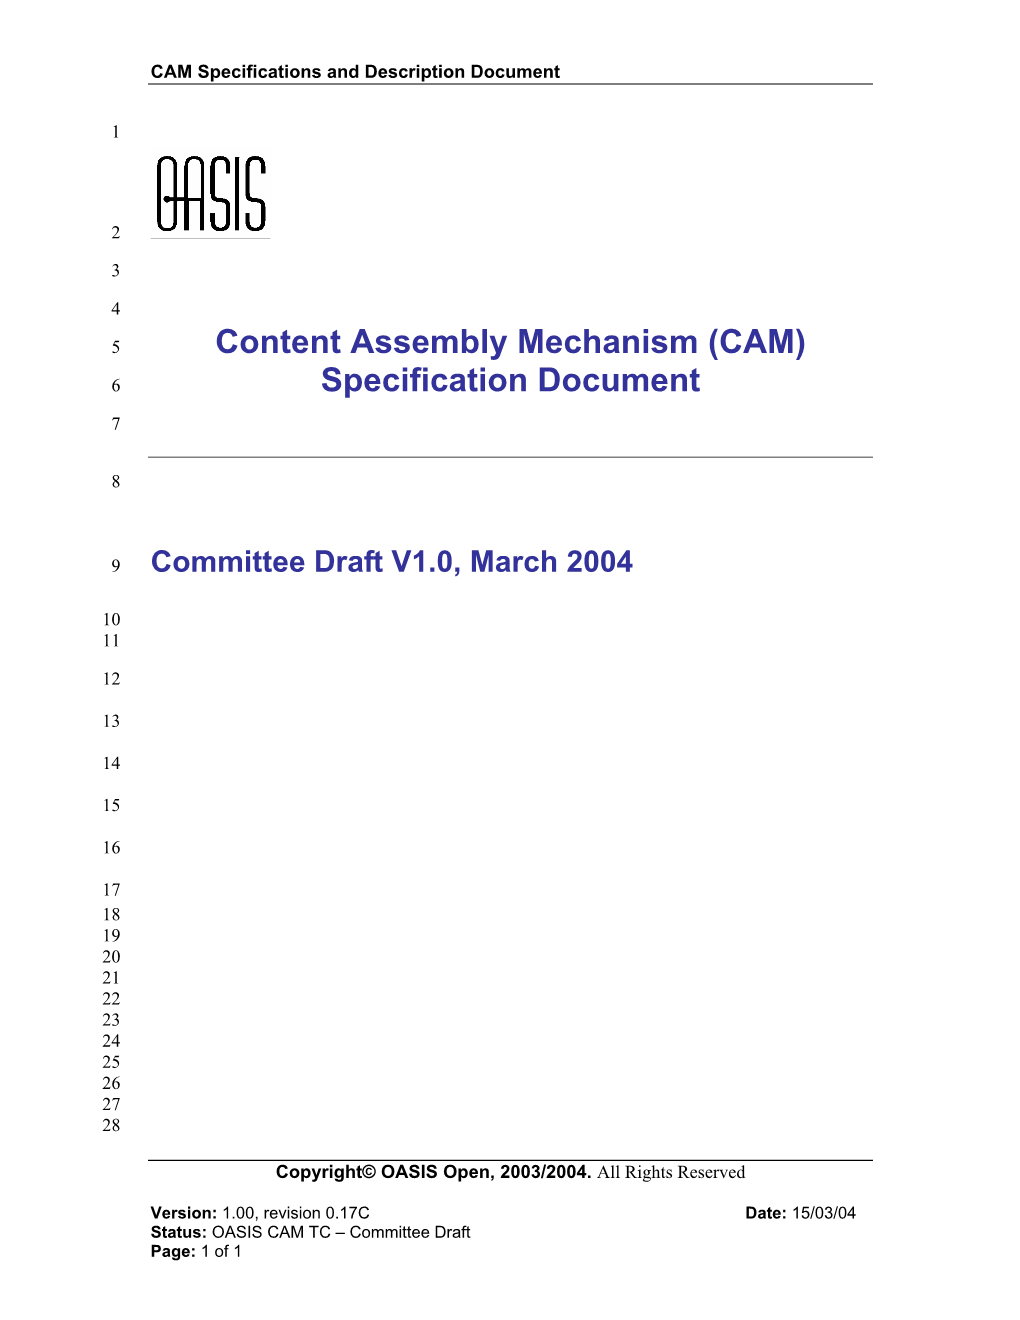 Content Assembly Mechanism (CAM) Specification Document